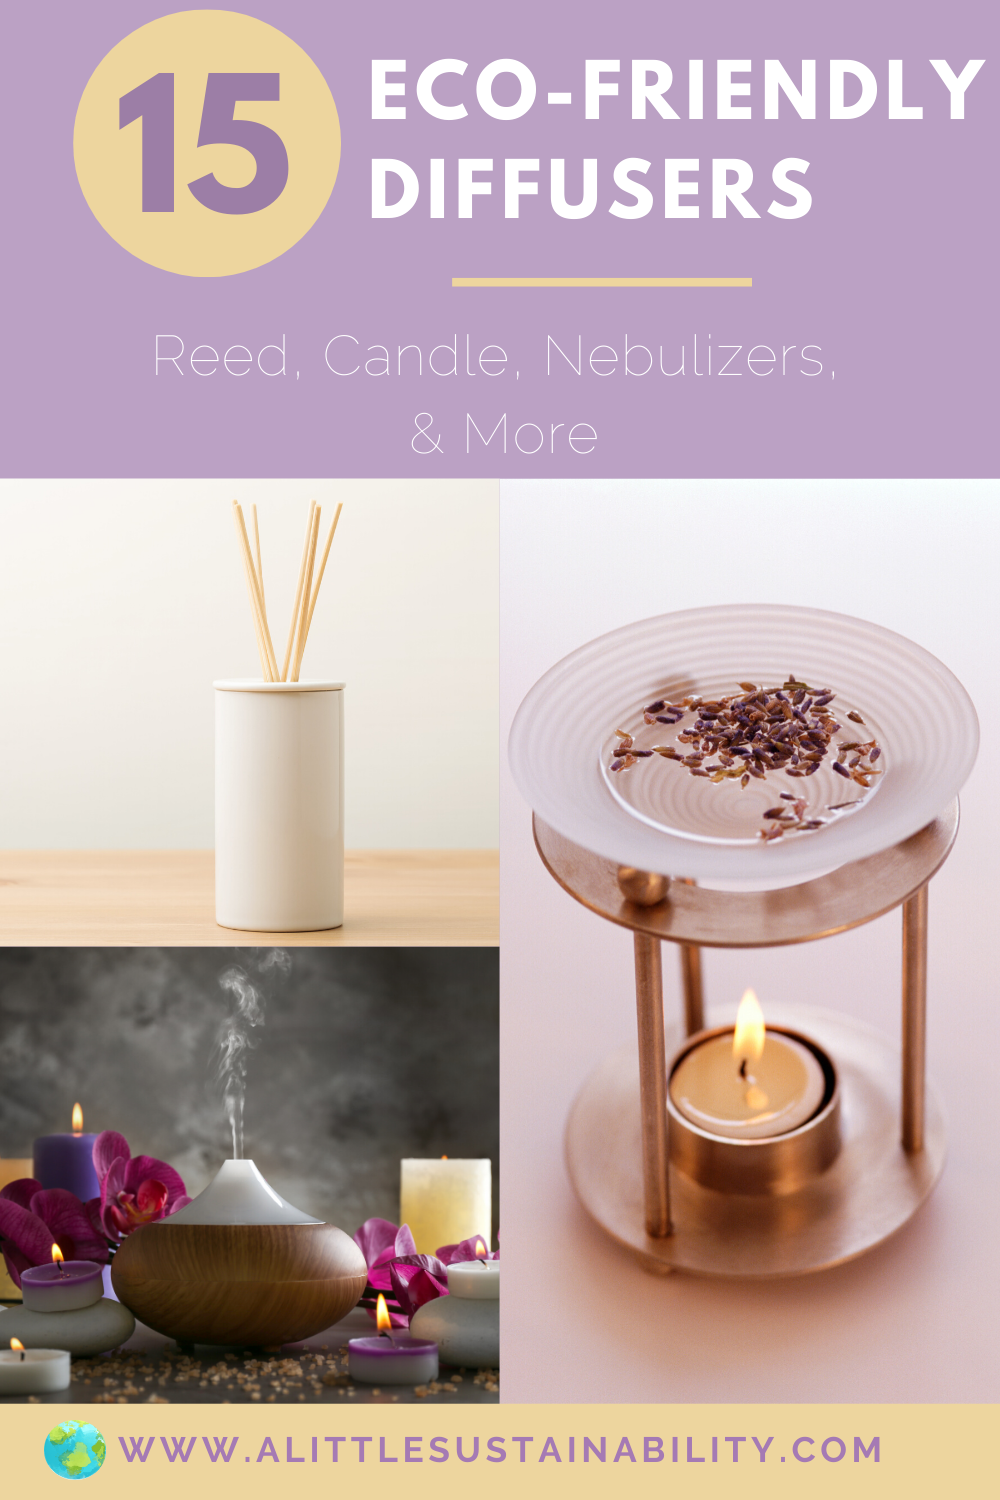 Not all essential oil diffusers are made the same, we’ve curated a list of the best eco-friendly diffusers of 2020 for you.  Diffusing essential oils is super popular, it is not just for the yogis and health conscious among us any more, pretty much everyone likes to diffuse essential oils. With its popularity, comes many companies trying to take advantage of the product. When there are many companies trying to make a profit off of the popularity of aromatherapy, there will be cheaply and environmentally harmful made products out there. So, we have found the best eco-friendly ways for you to enjoy the goodness and benefits of essential oils no matter what your budget or where you are on your eco-conscious journey.  Our list of the best eco-friendly diffusers of 2020 include different types of essential oil diffuser, from natural stone, reed, candle, nebulizers, and electric